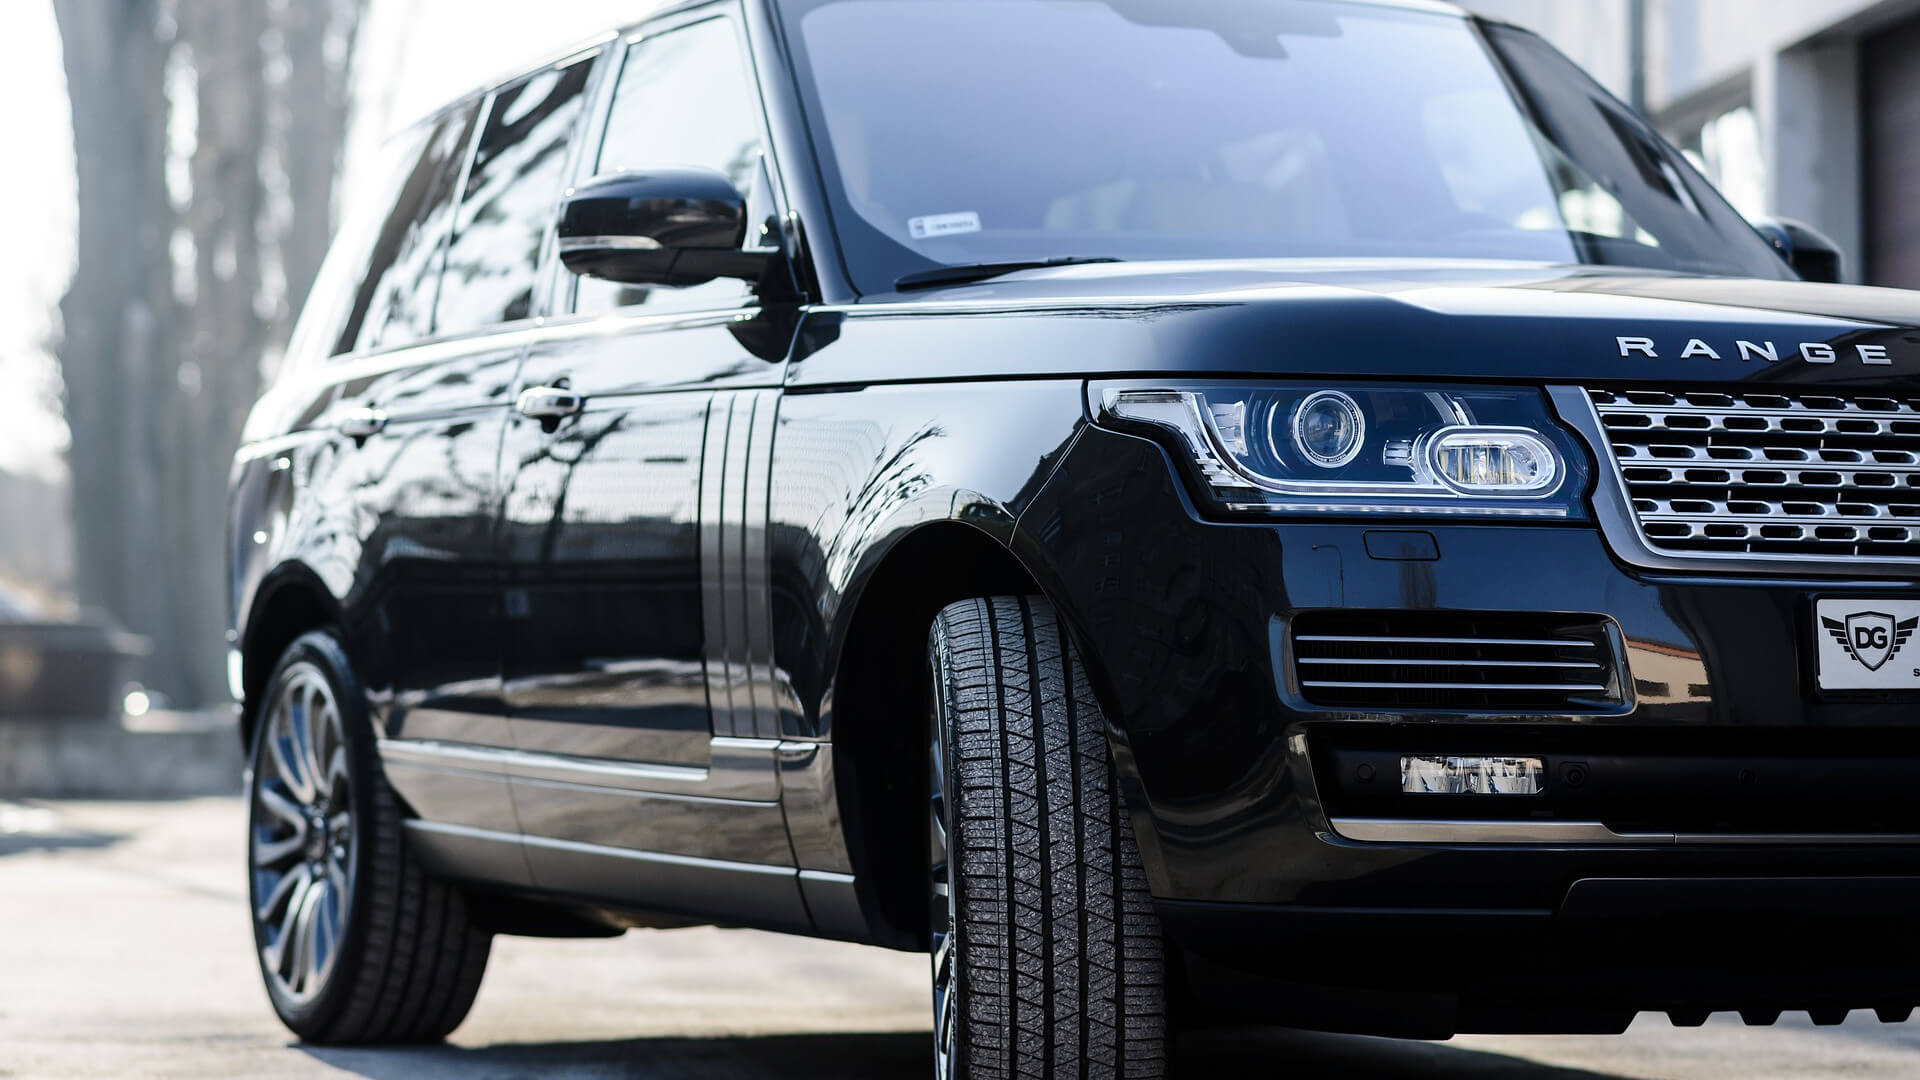 Direct4x4 Accessories for Range Rover Vehicles